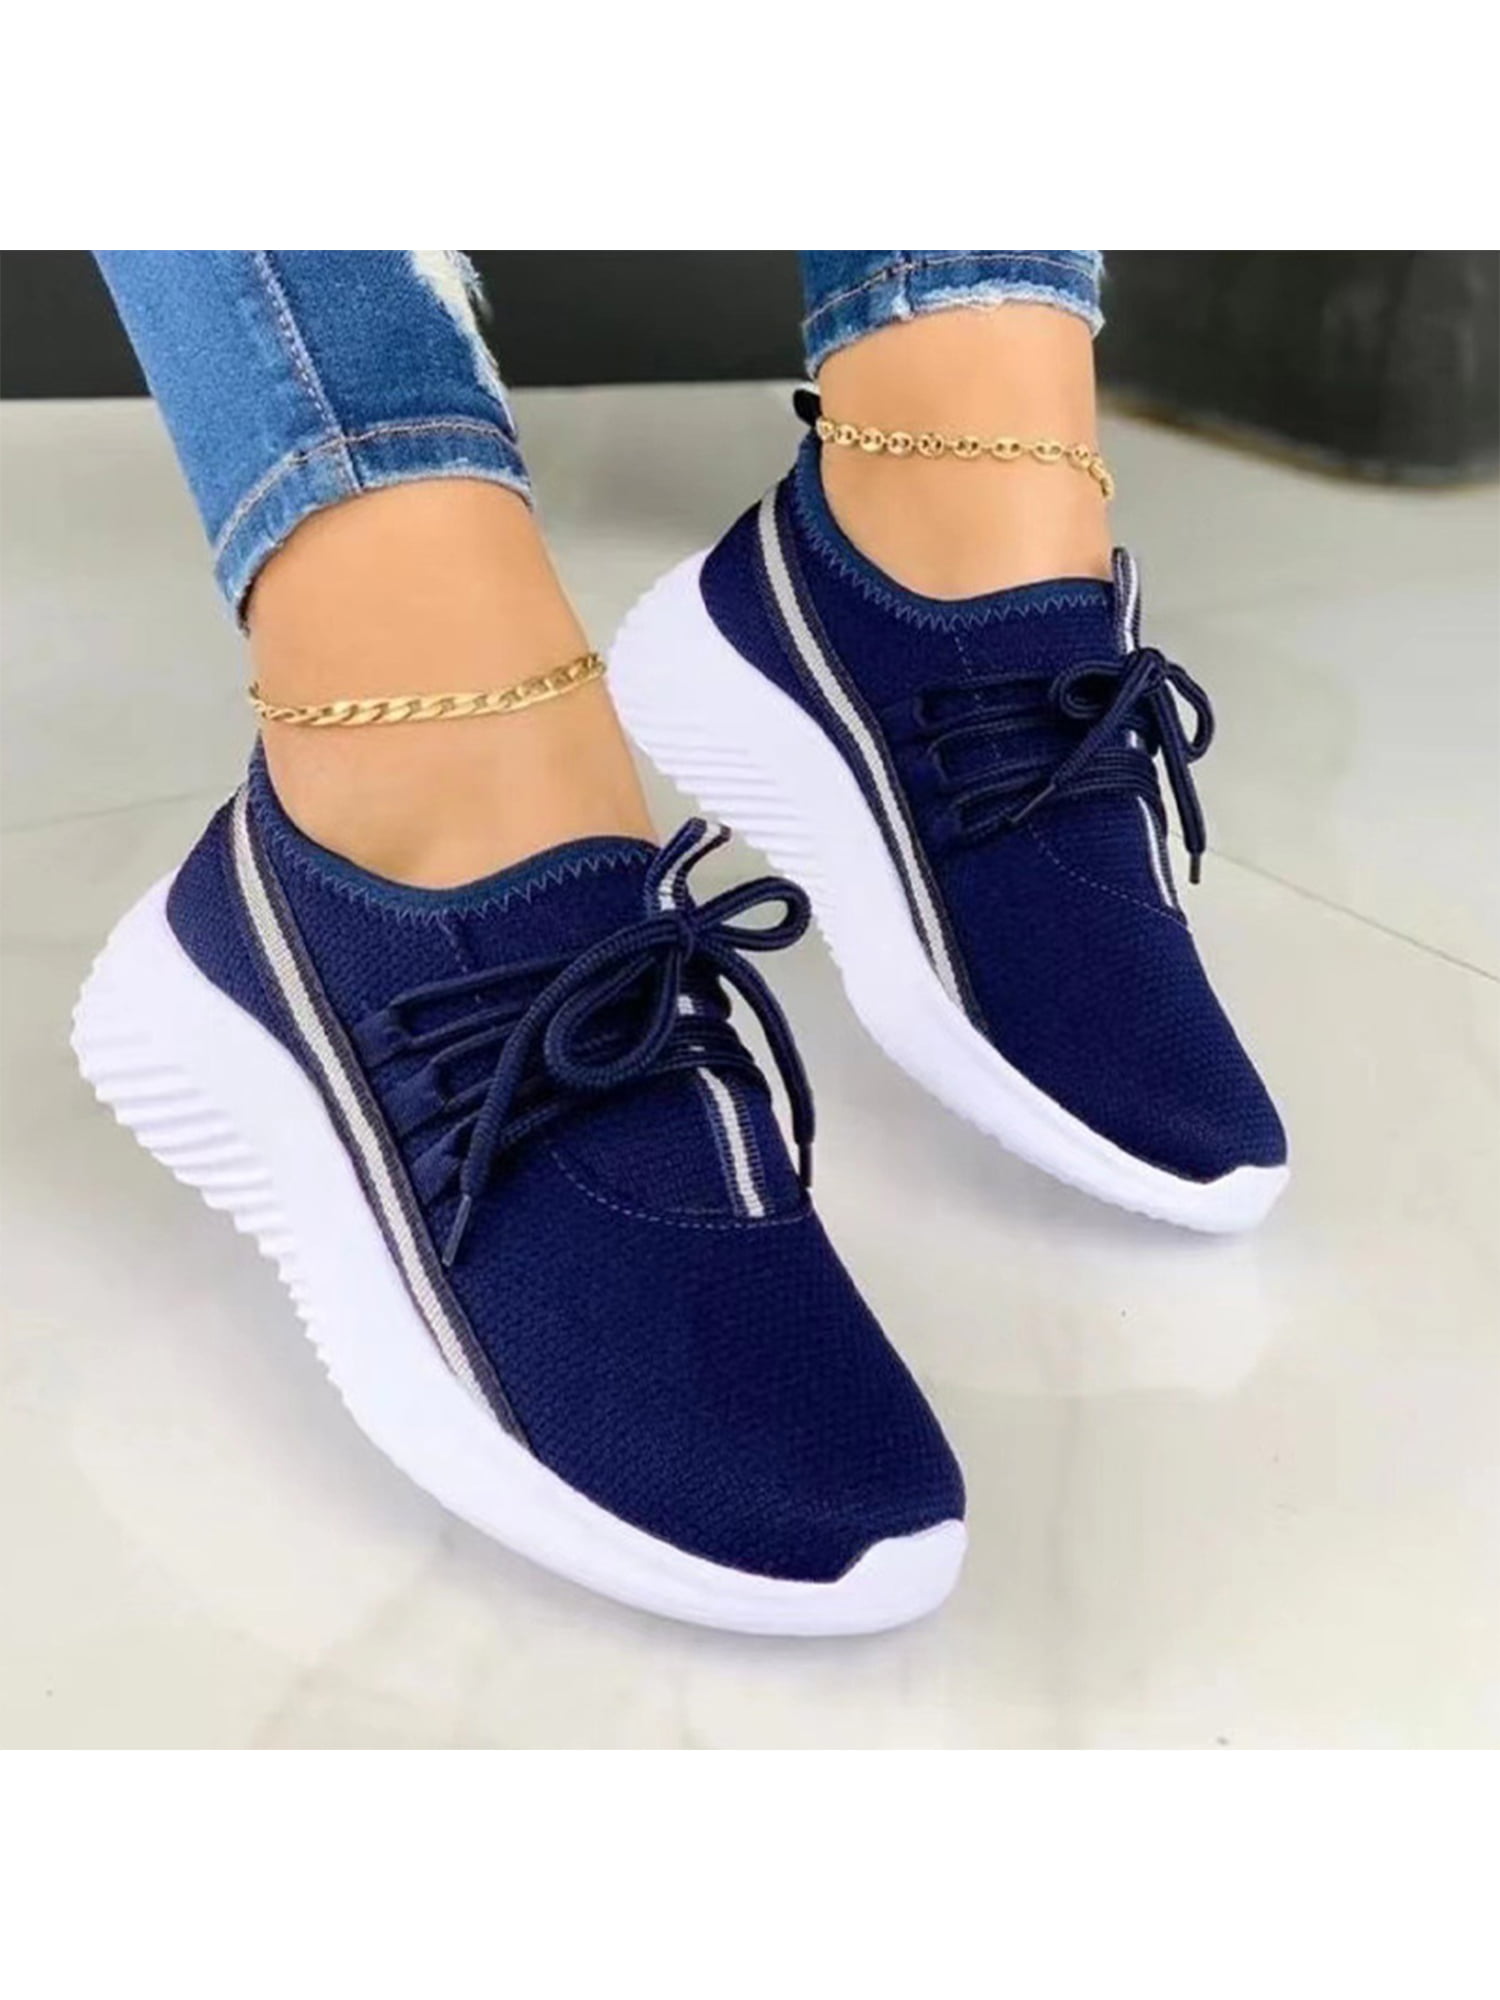 Women's Casual Sneaker Athletic Tennis Shoes Walking Running Lace-Up Suede 